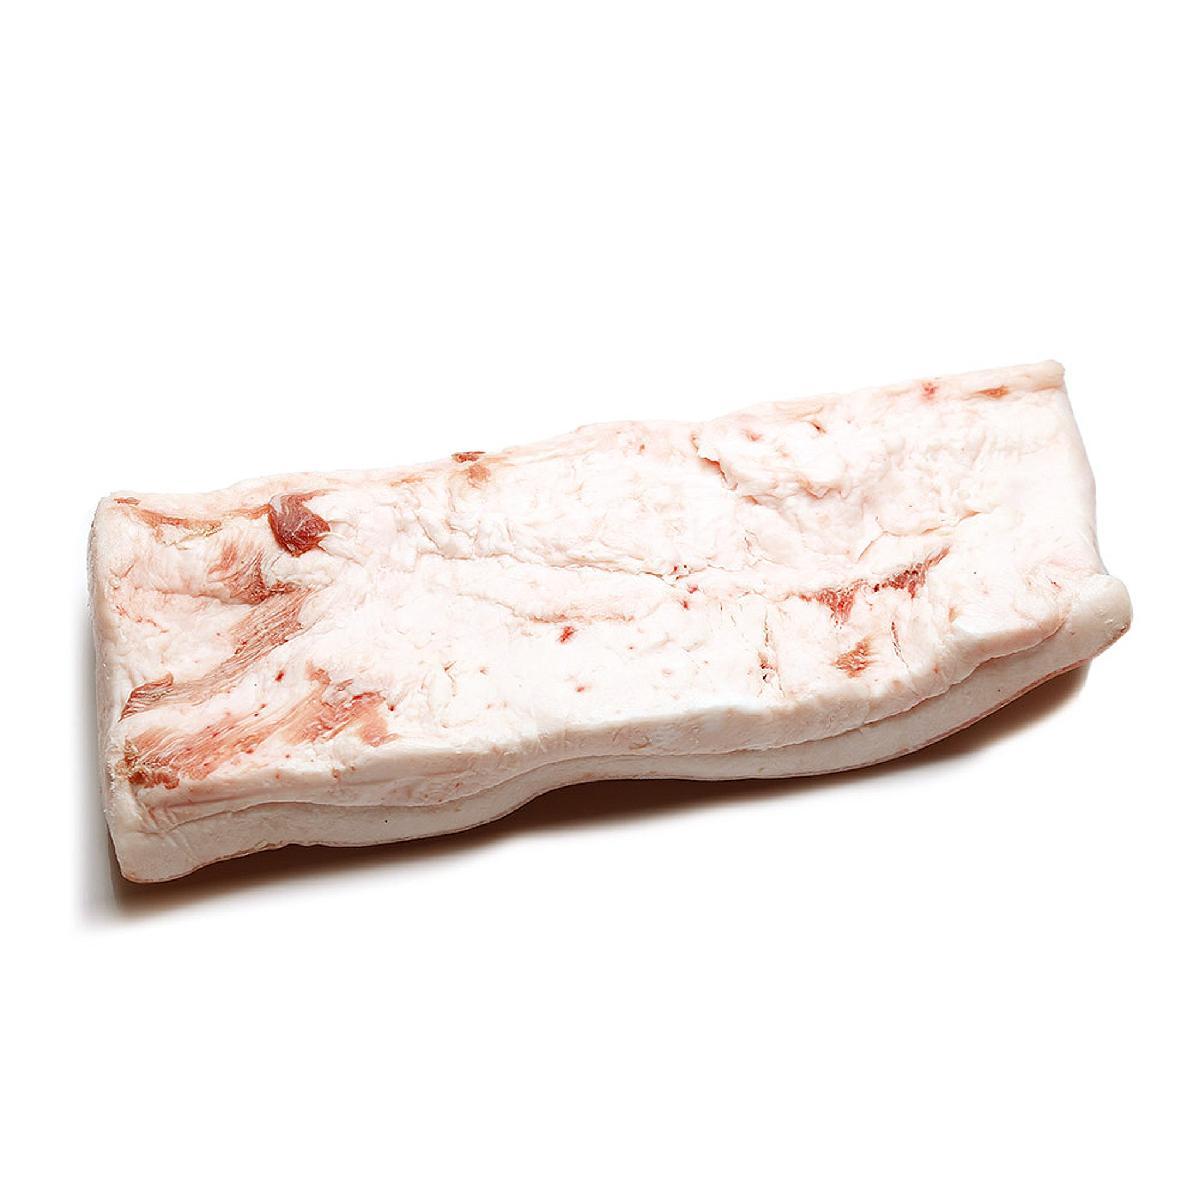 FROZEN Pork Back Fat READY FOR SHIPMENT ANY PORT OF YOUR CHOICE